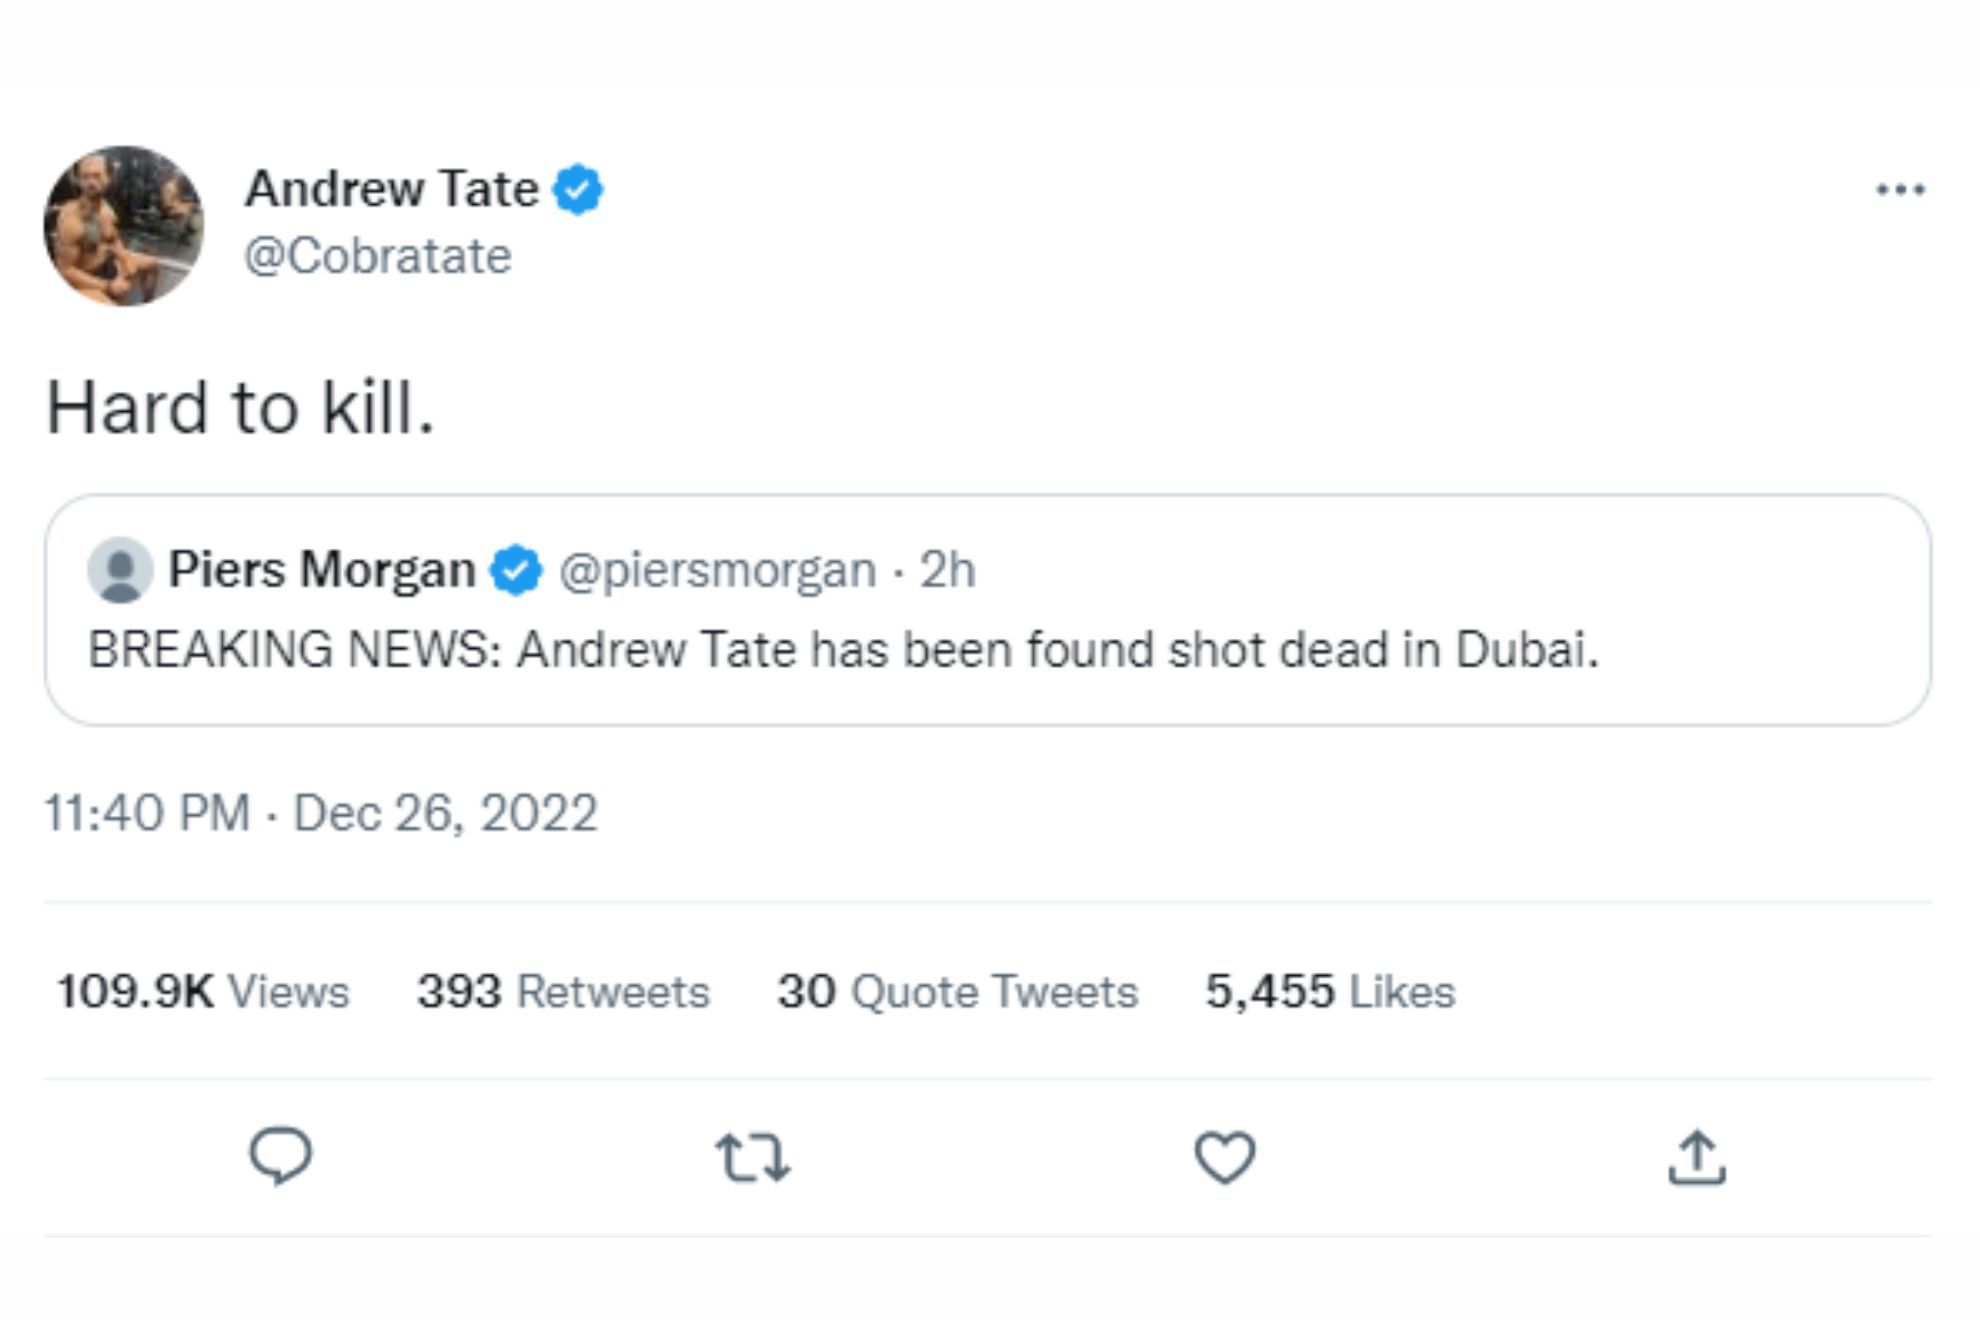 Andrew Tate responds to Piers Morgan tweet claiming he was killed